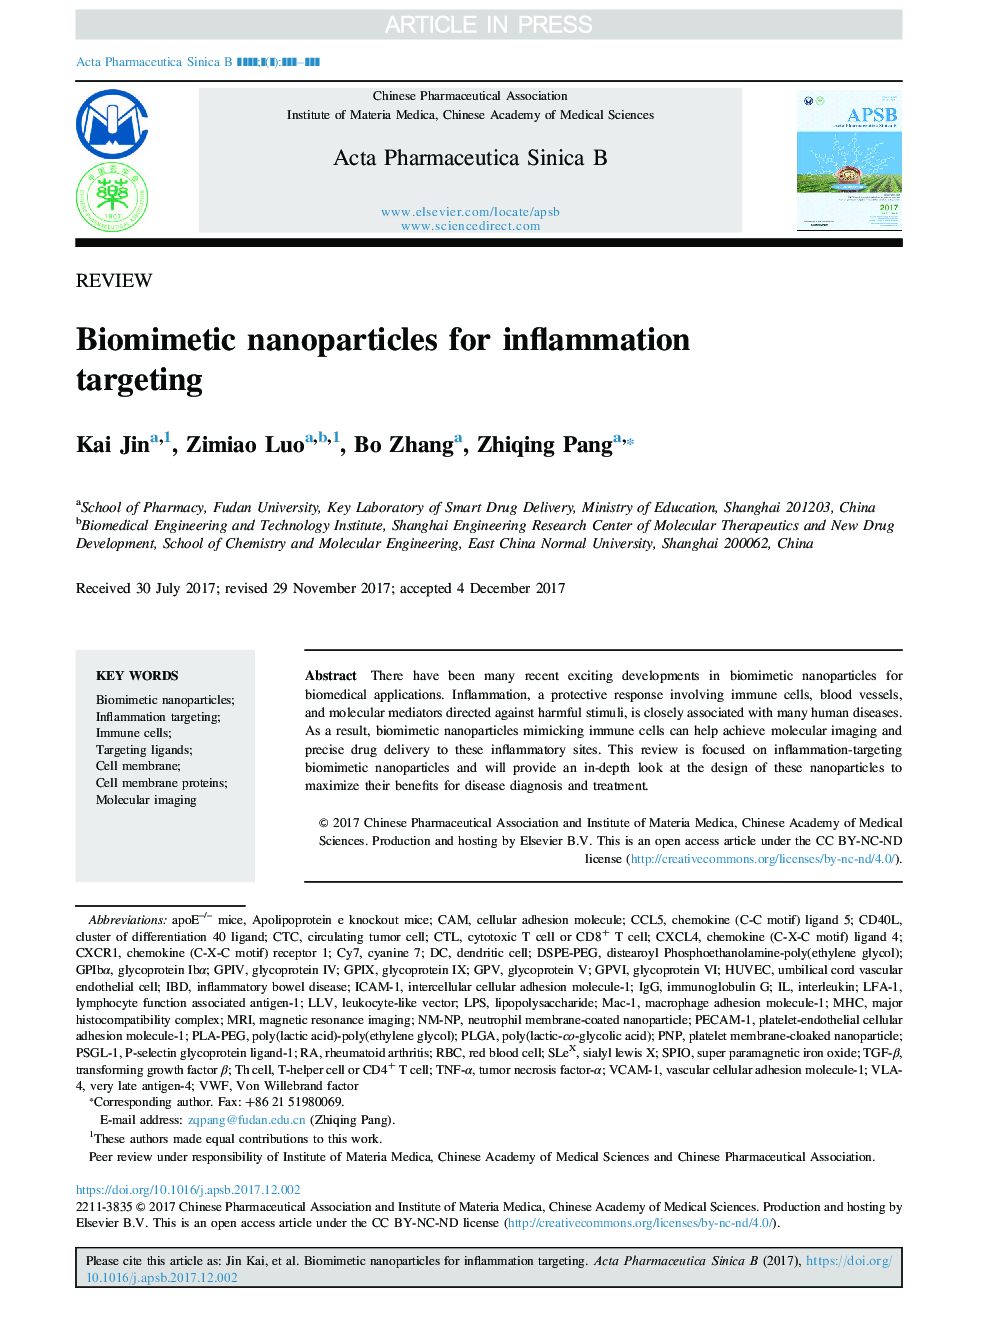 Biomimetic nanoparticles for inflammation targeting